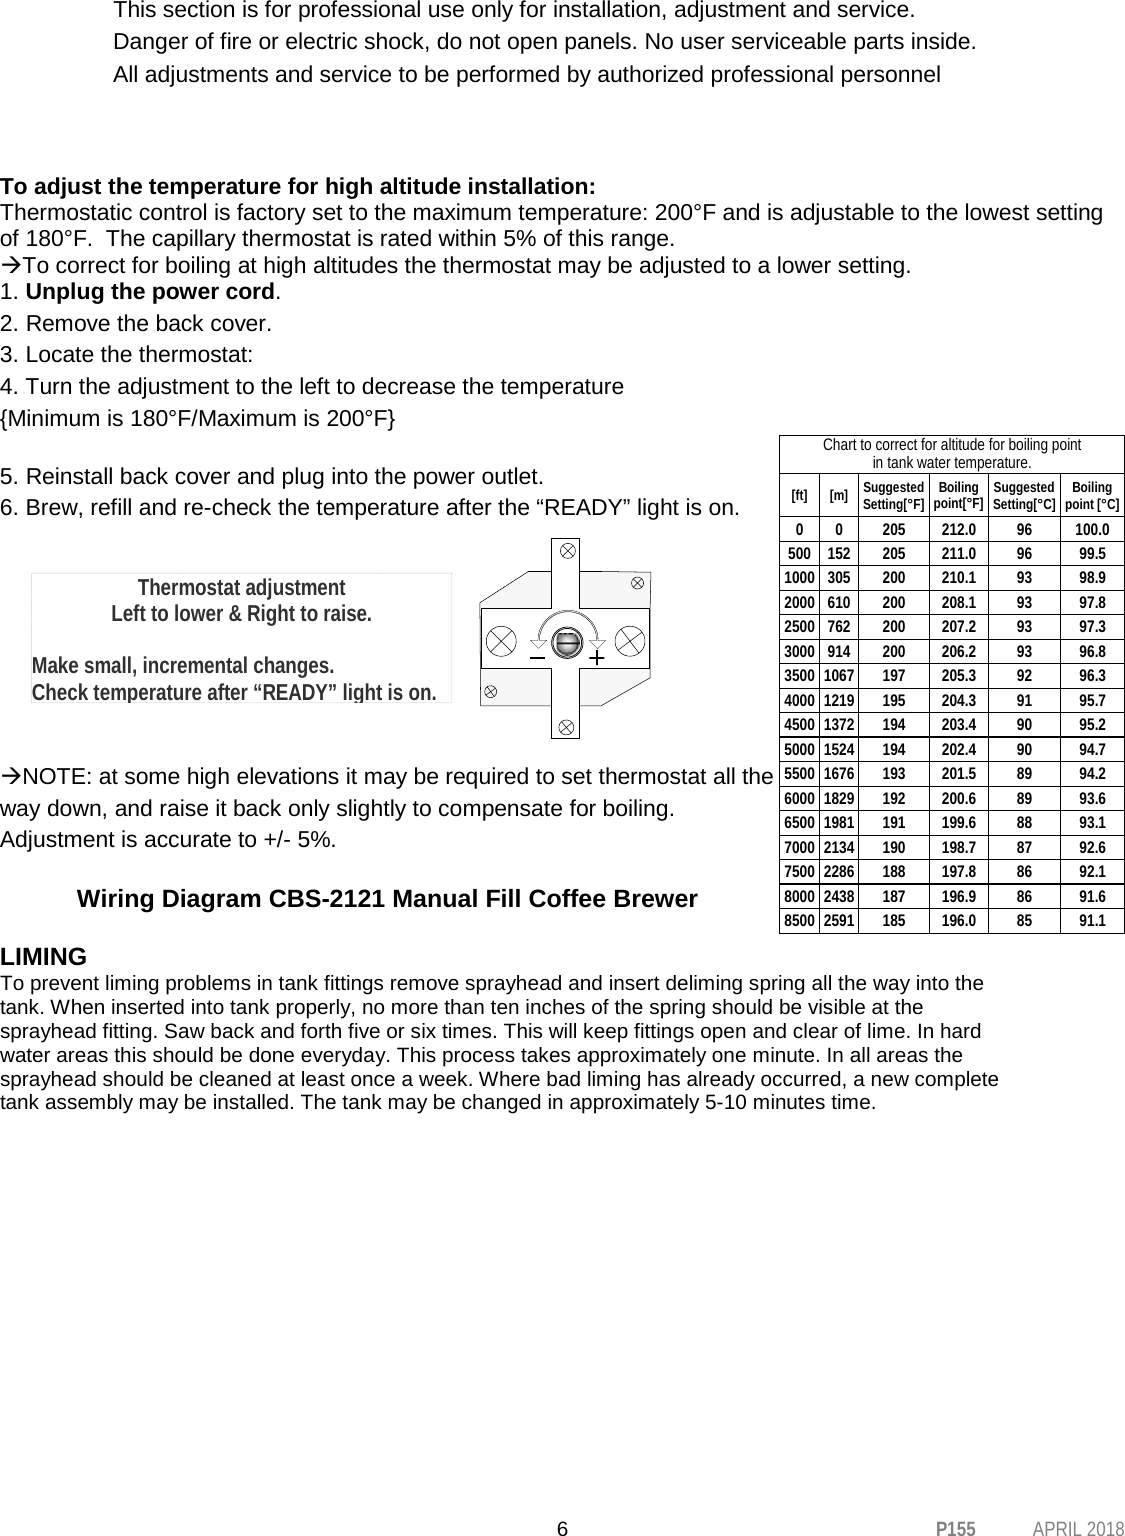 Page 6 of 10 - Cbs2121-user-manual